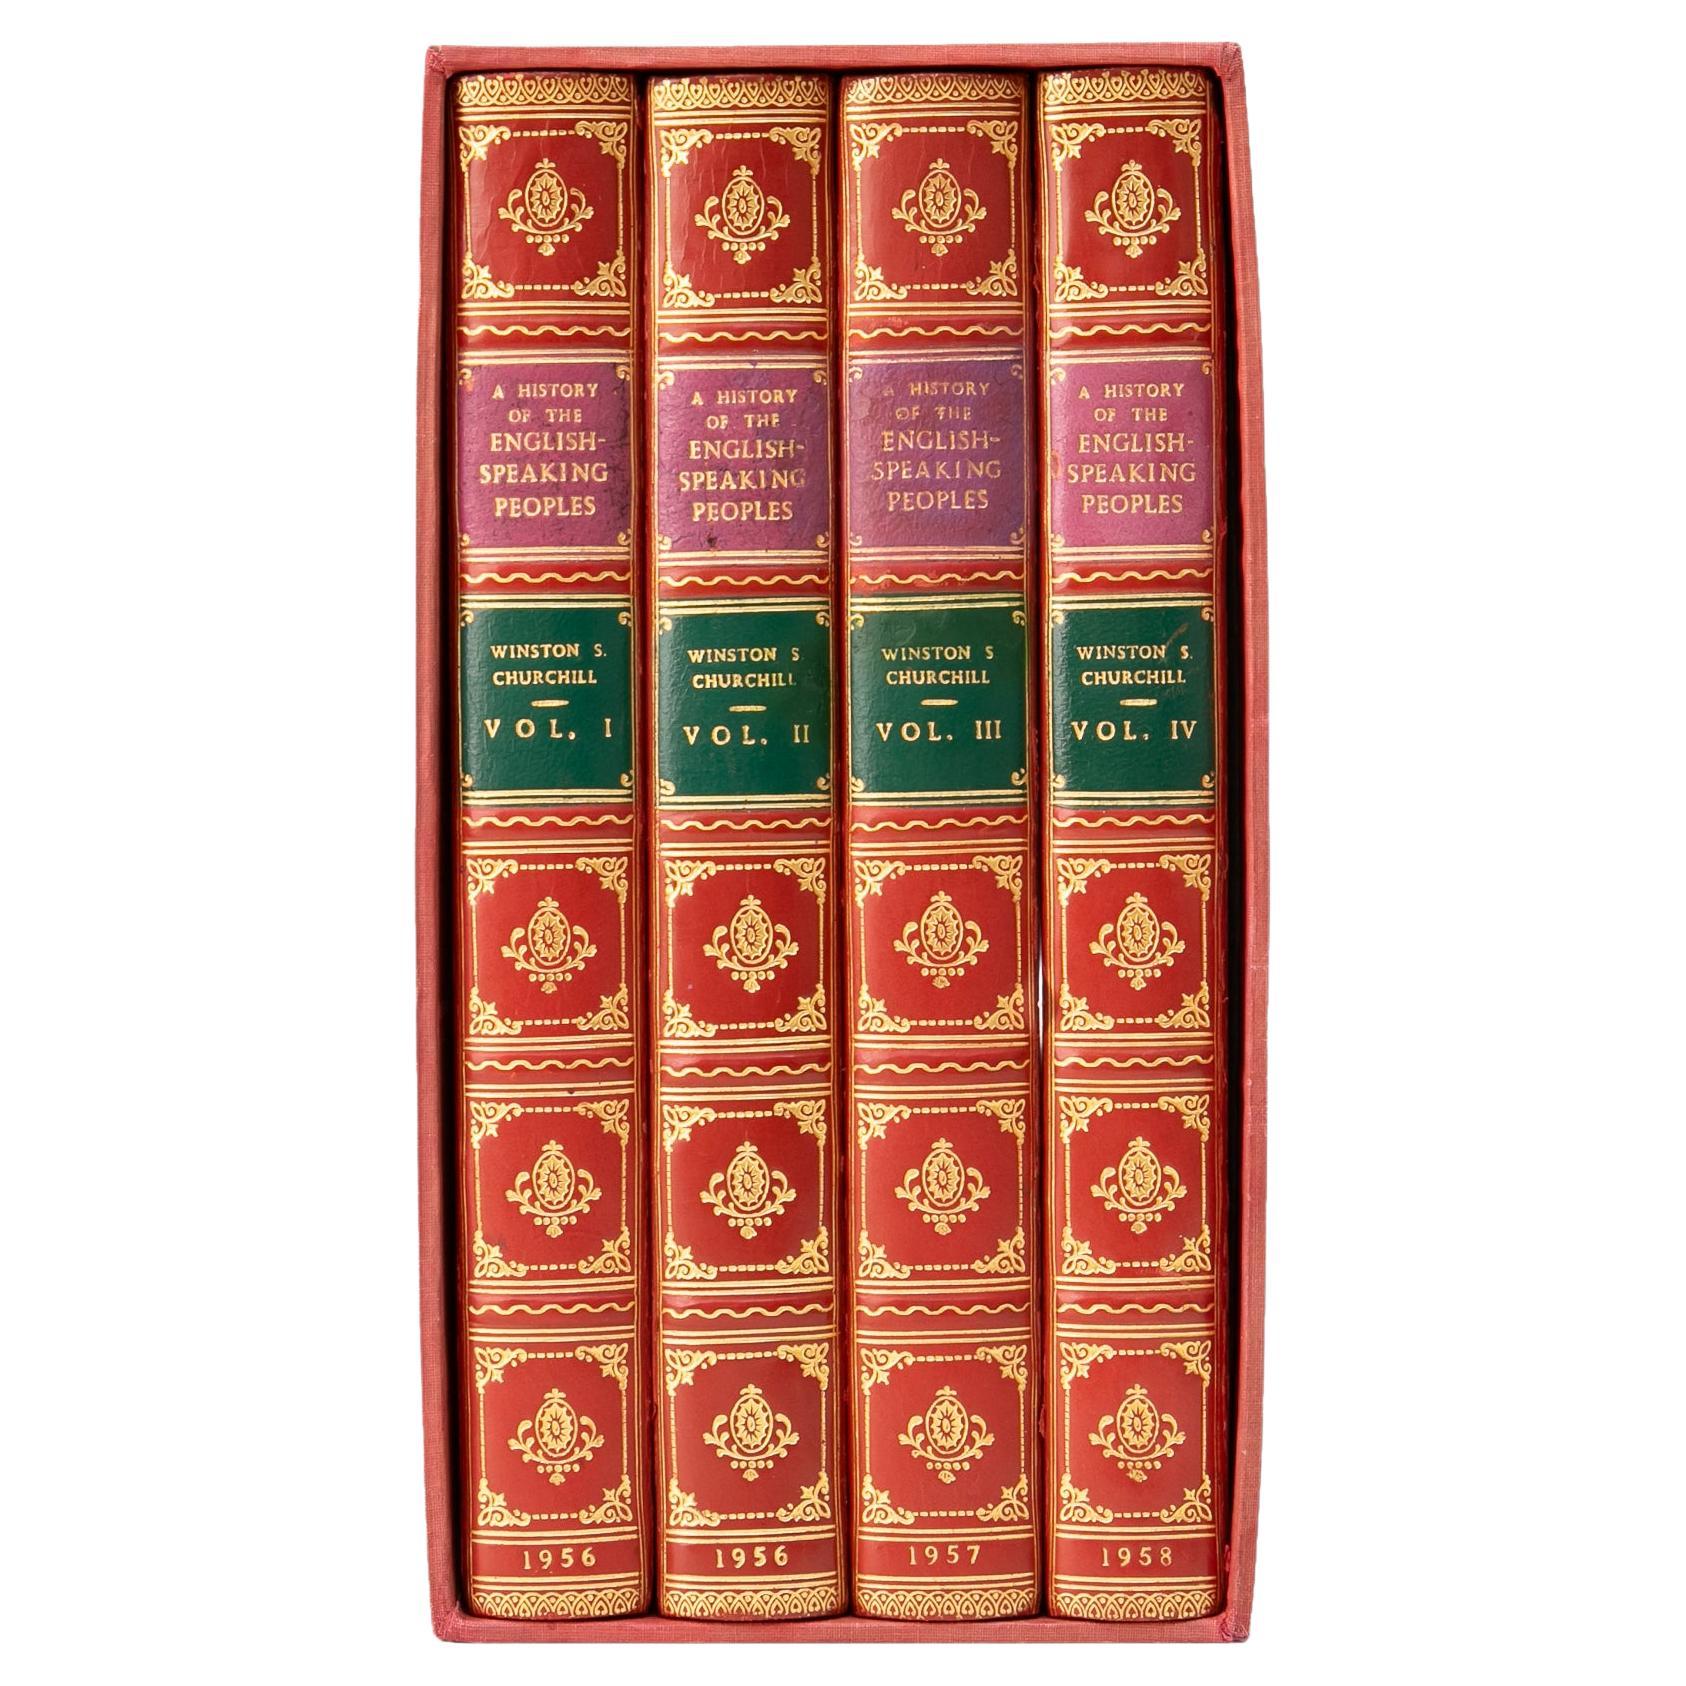 4 Volumes. Winston Churchill, A History of English Speaking Peoples.